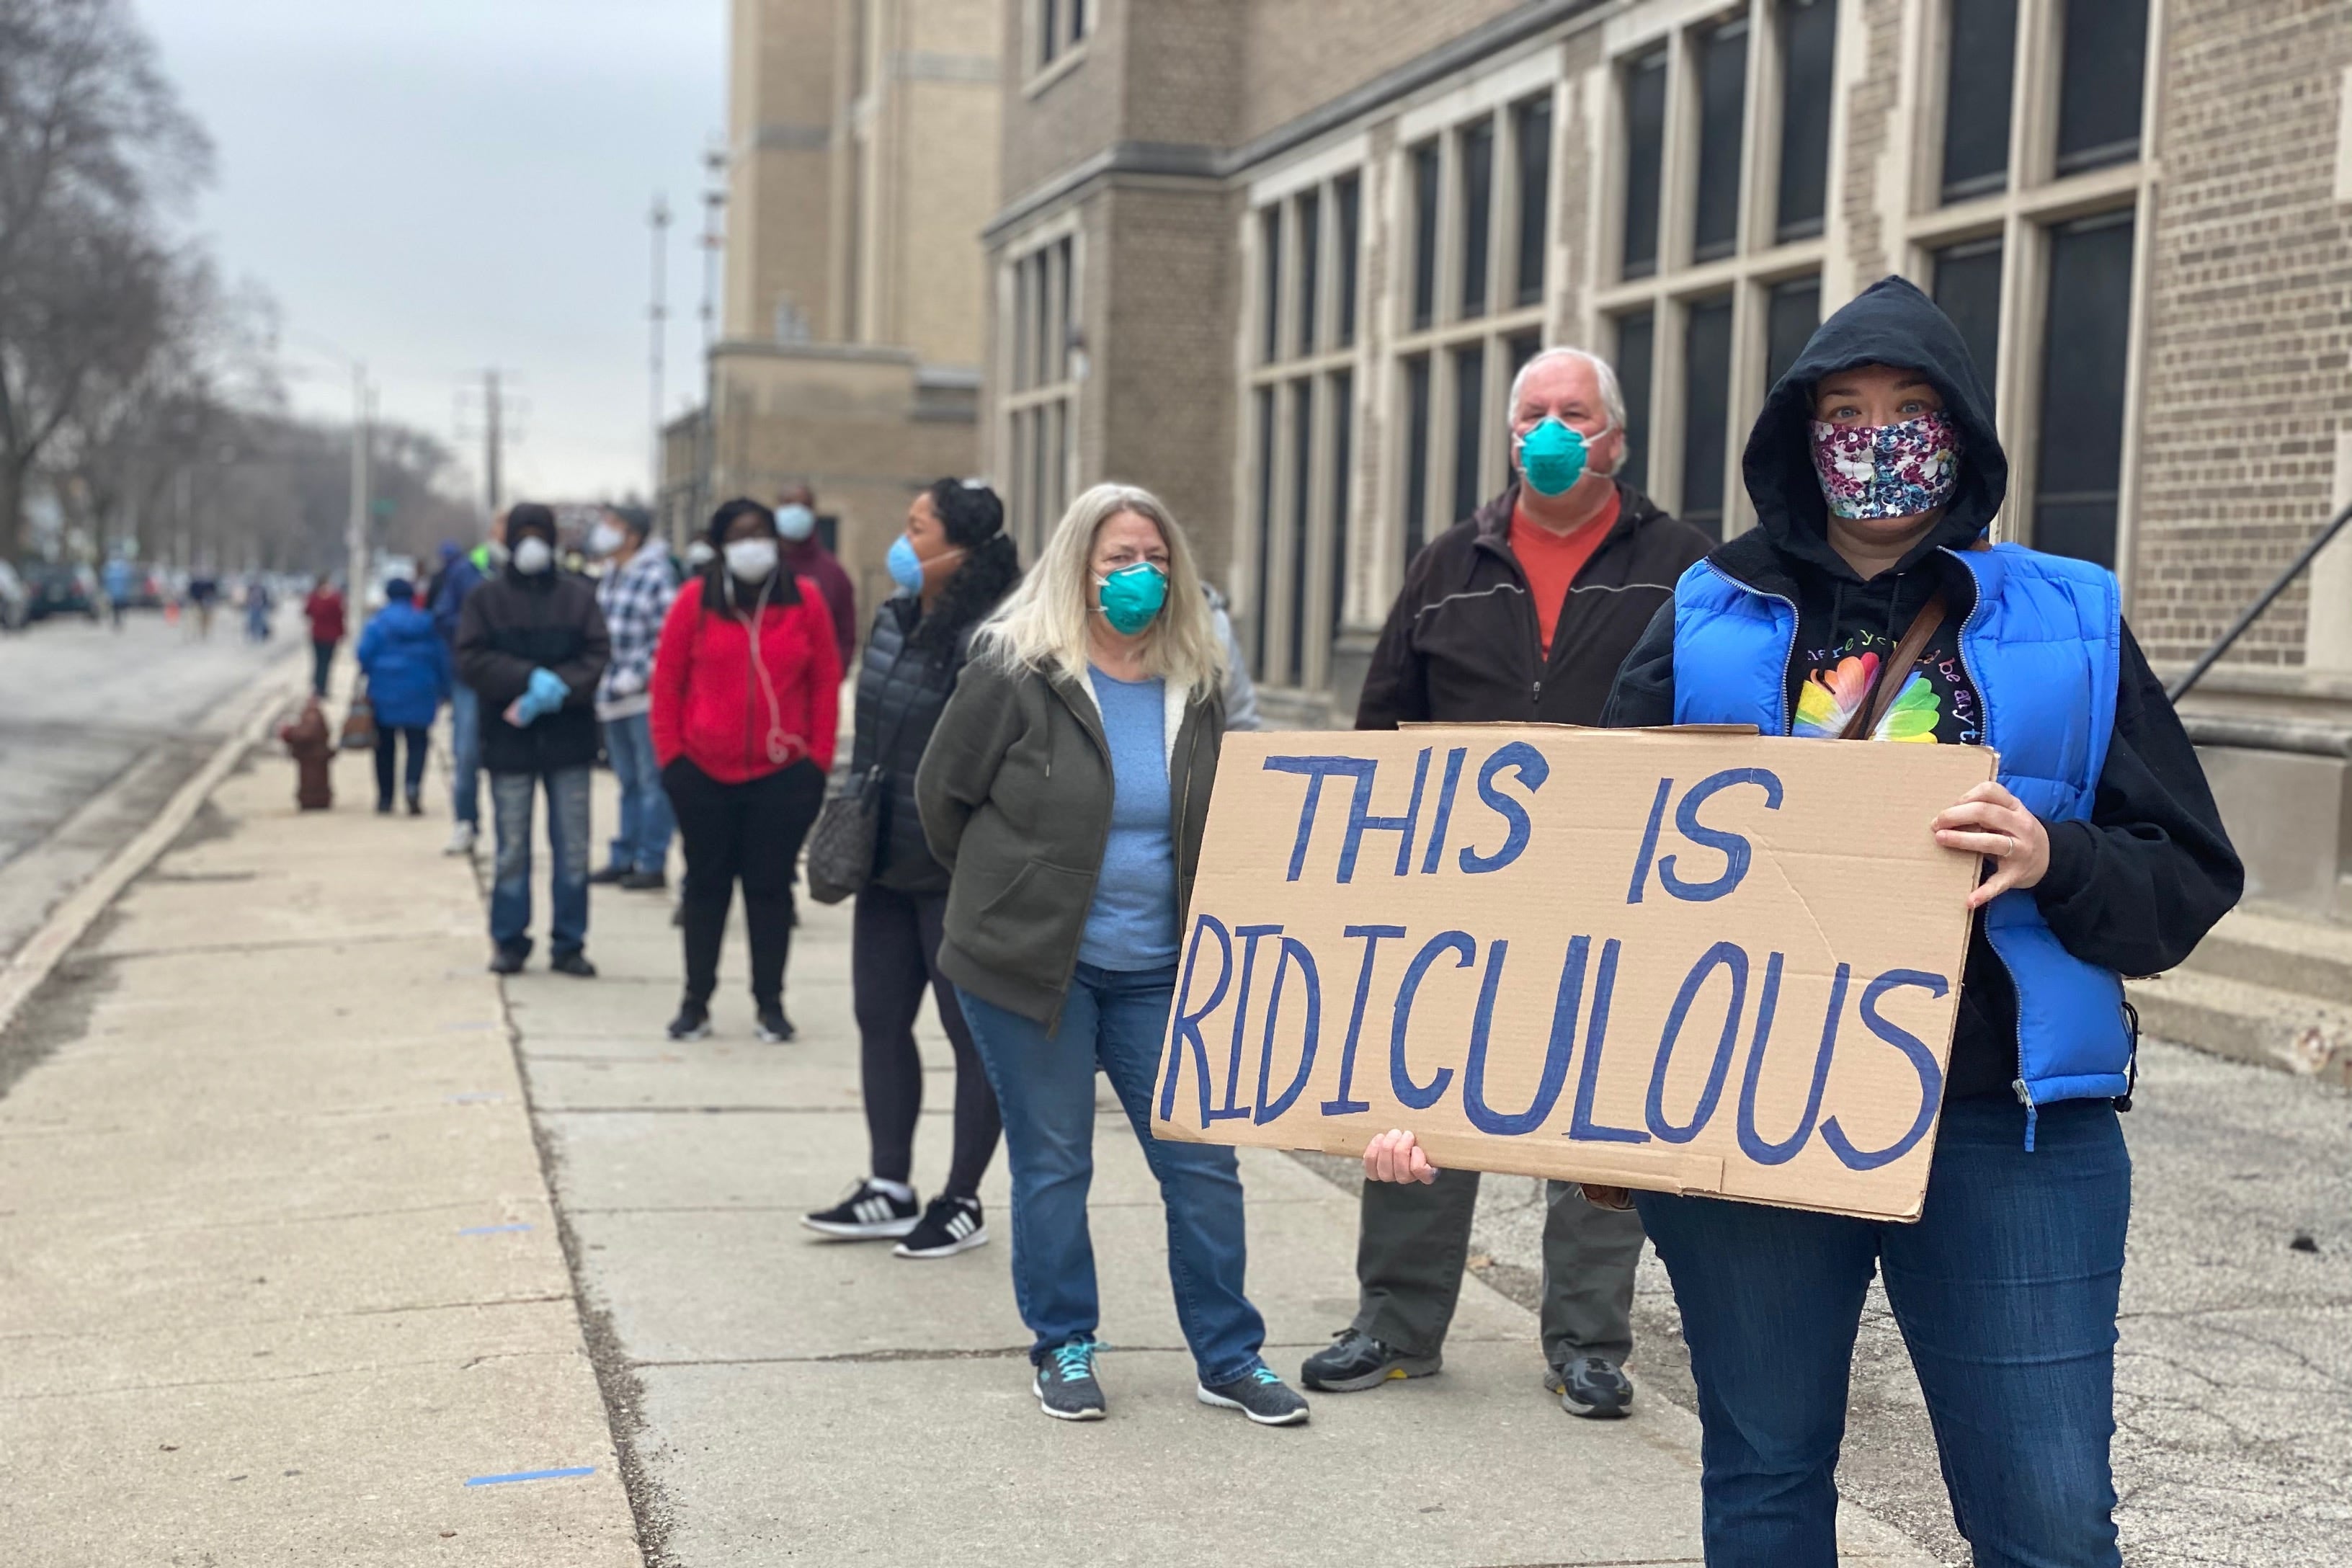 A line of voters spread out on a sidewalk and wearing masks. In the front, a masked woman holds a sign that says "This Is Ridiculous."